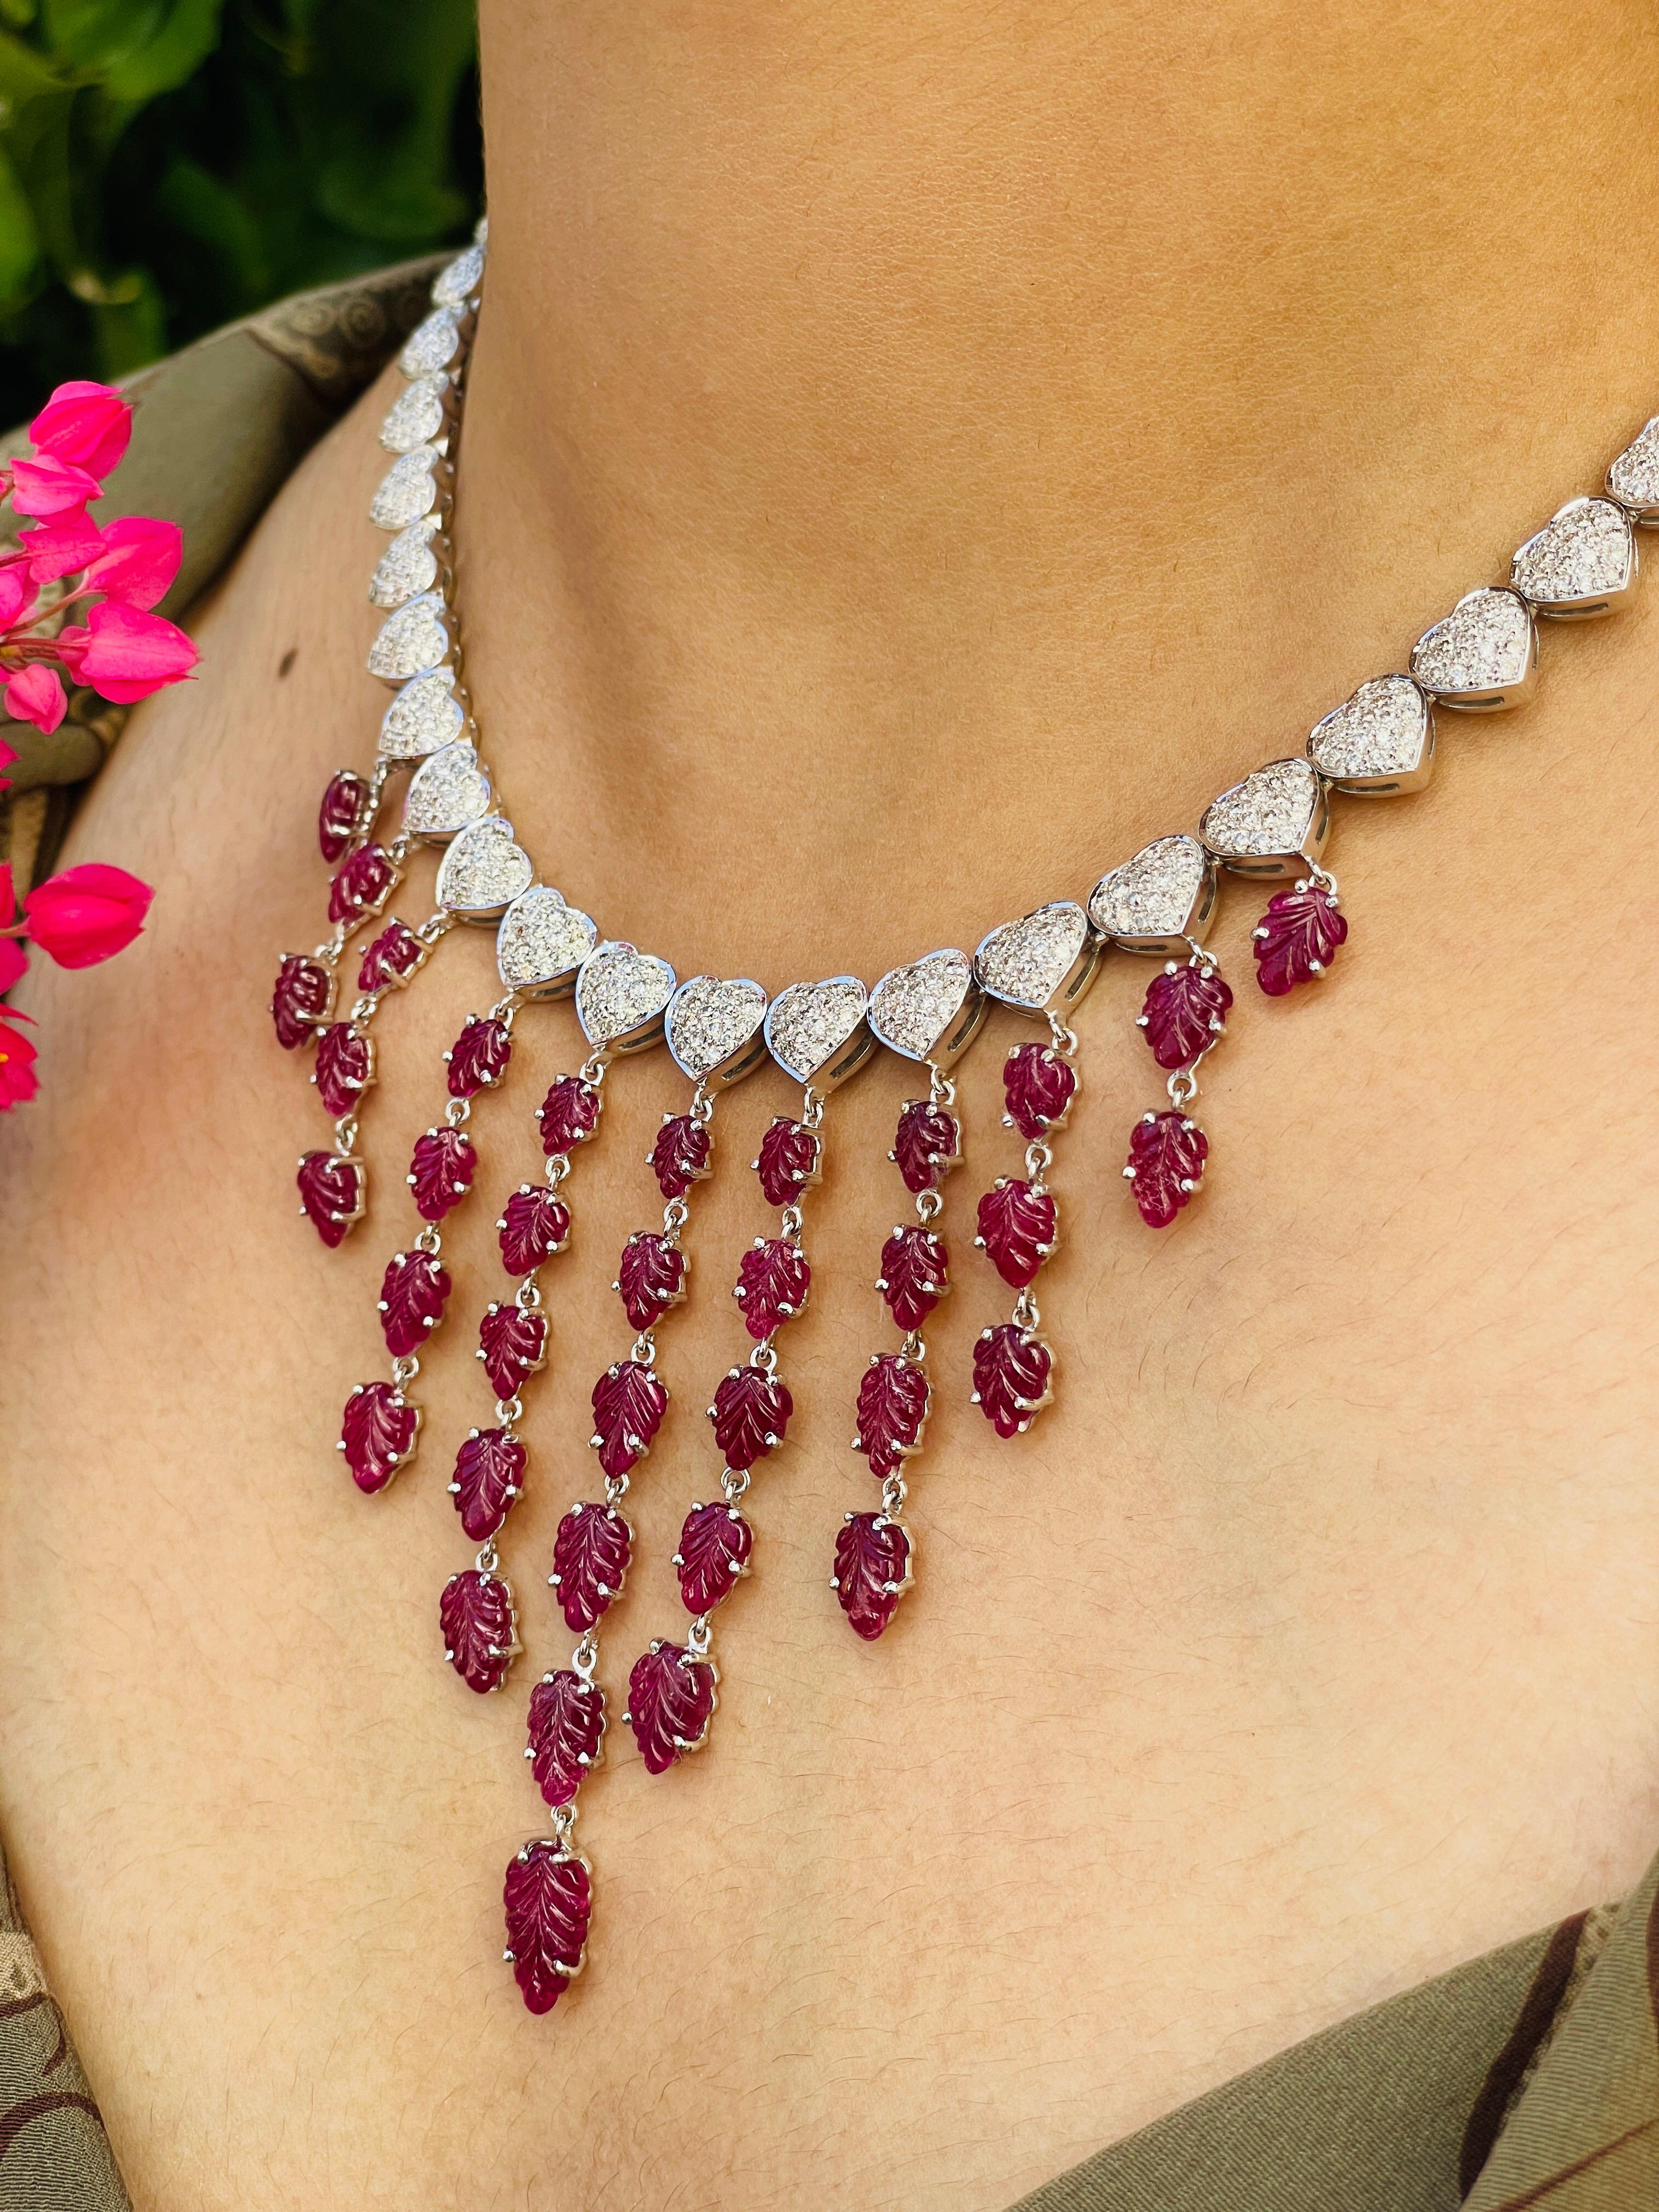 Ruby Necklace in 18K Gold studded with leaf cut ruby pieces and diamonds.
Accessorize your look with this elegant ruby beaded necklace. This stunning piece of jewelry instantly elevates a casual look or dressy outfit. Comfortable and easy to wear,